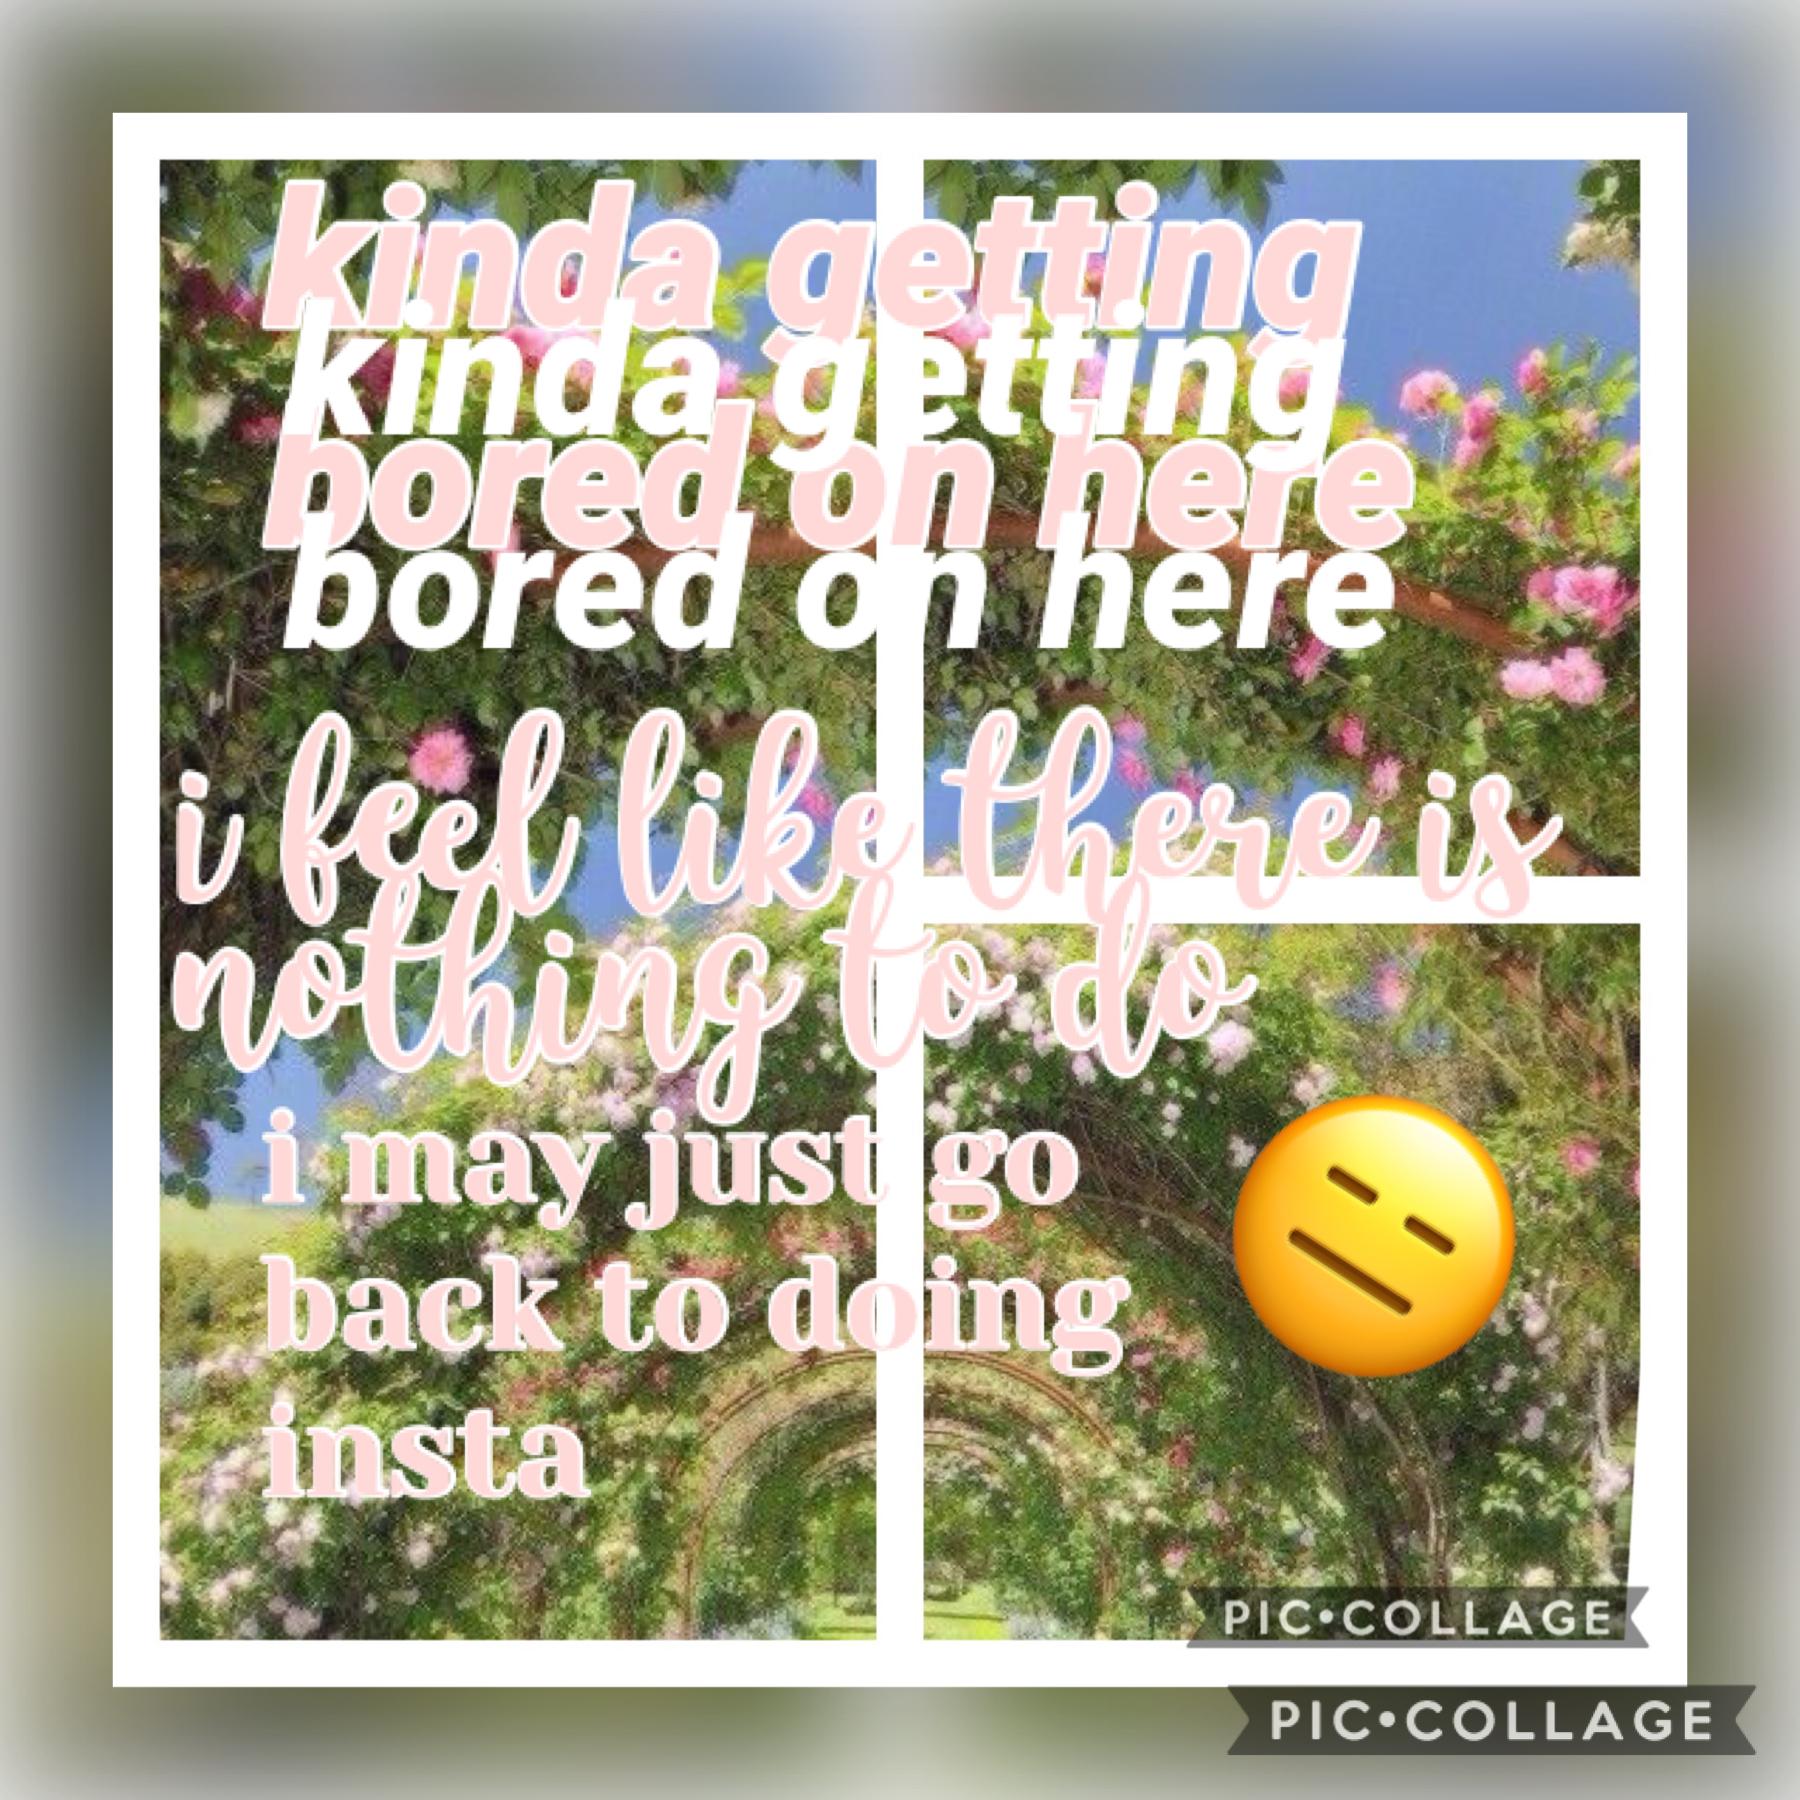 🧚‍♀️tap🧚‍♀️

getting bored...😭😂i feel like i have nothing to do on here... anything you think i should. i’m still on instagram, but idk if i should do that instead... 